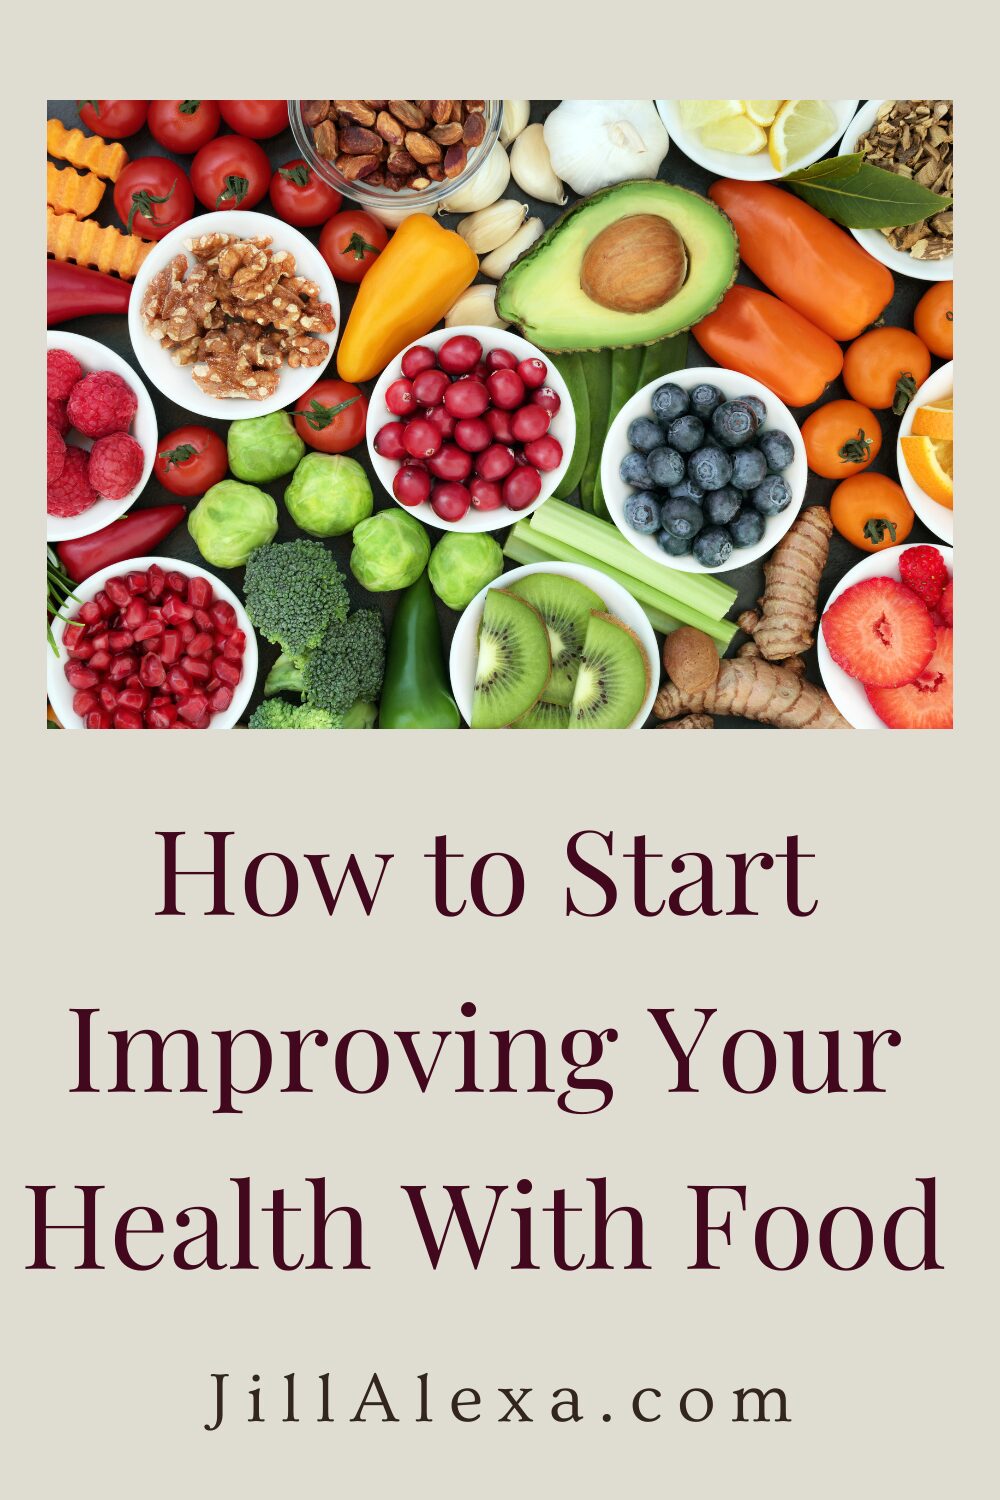 Improving your health with food involves a holistic approach. It's not just about what you eat, but how you eat, how you supplement and what you don't eat. Read on...